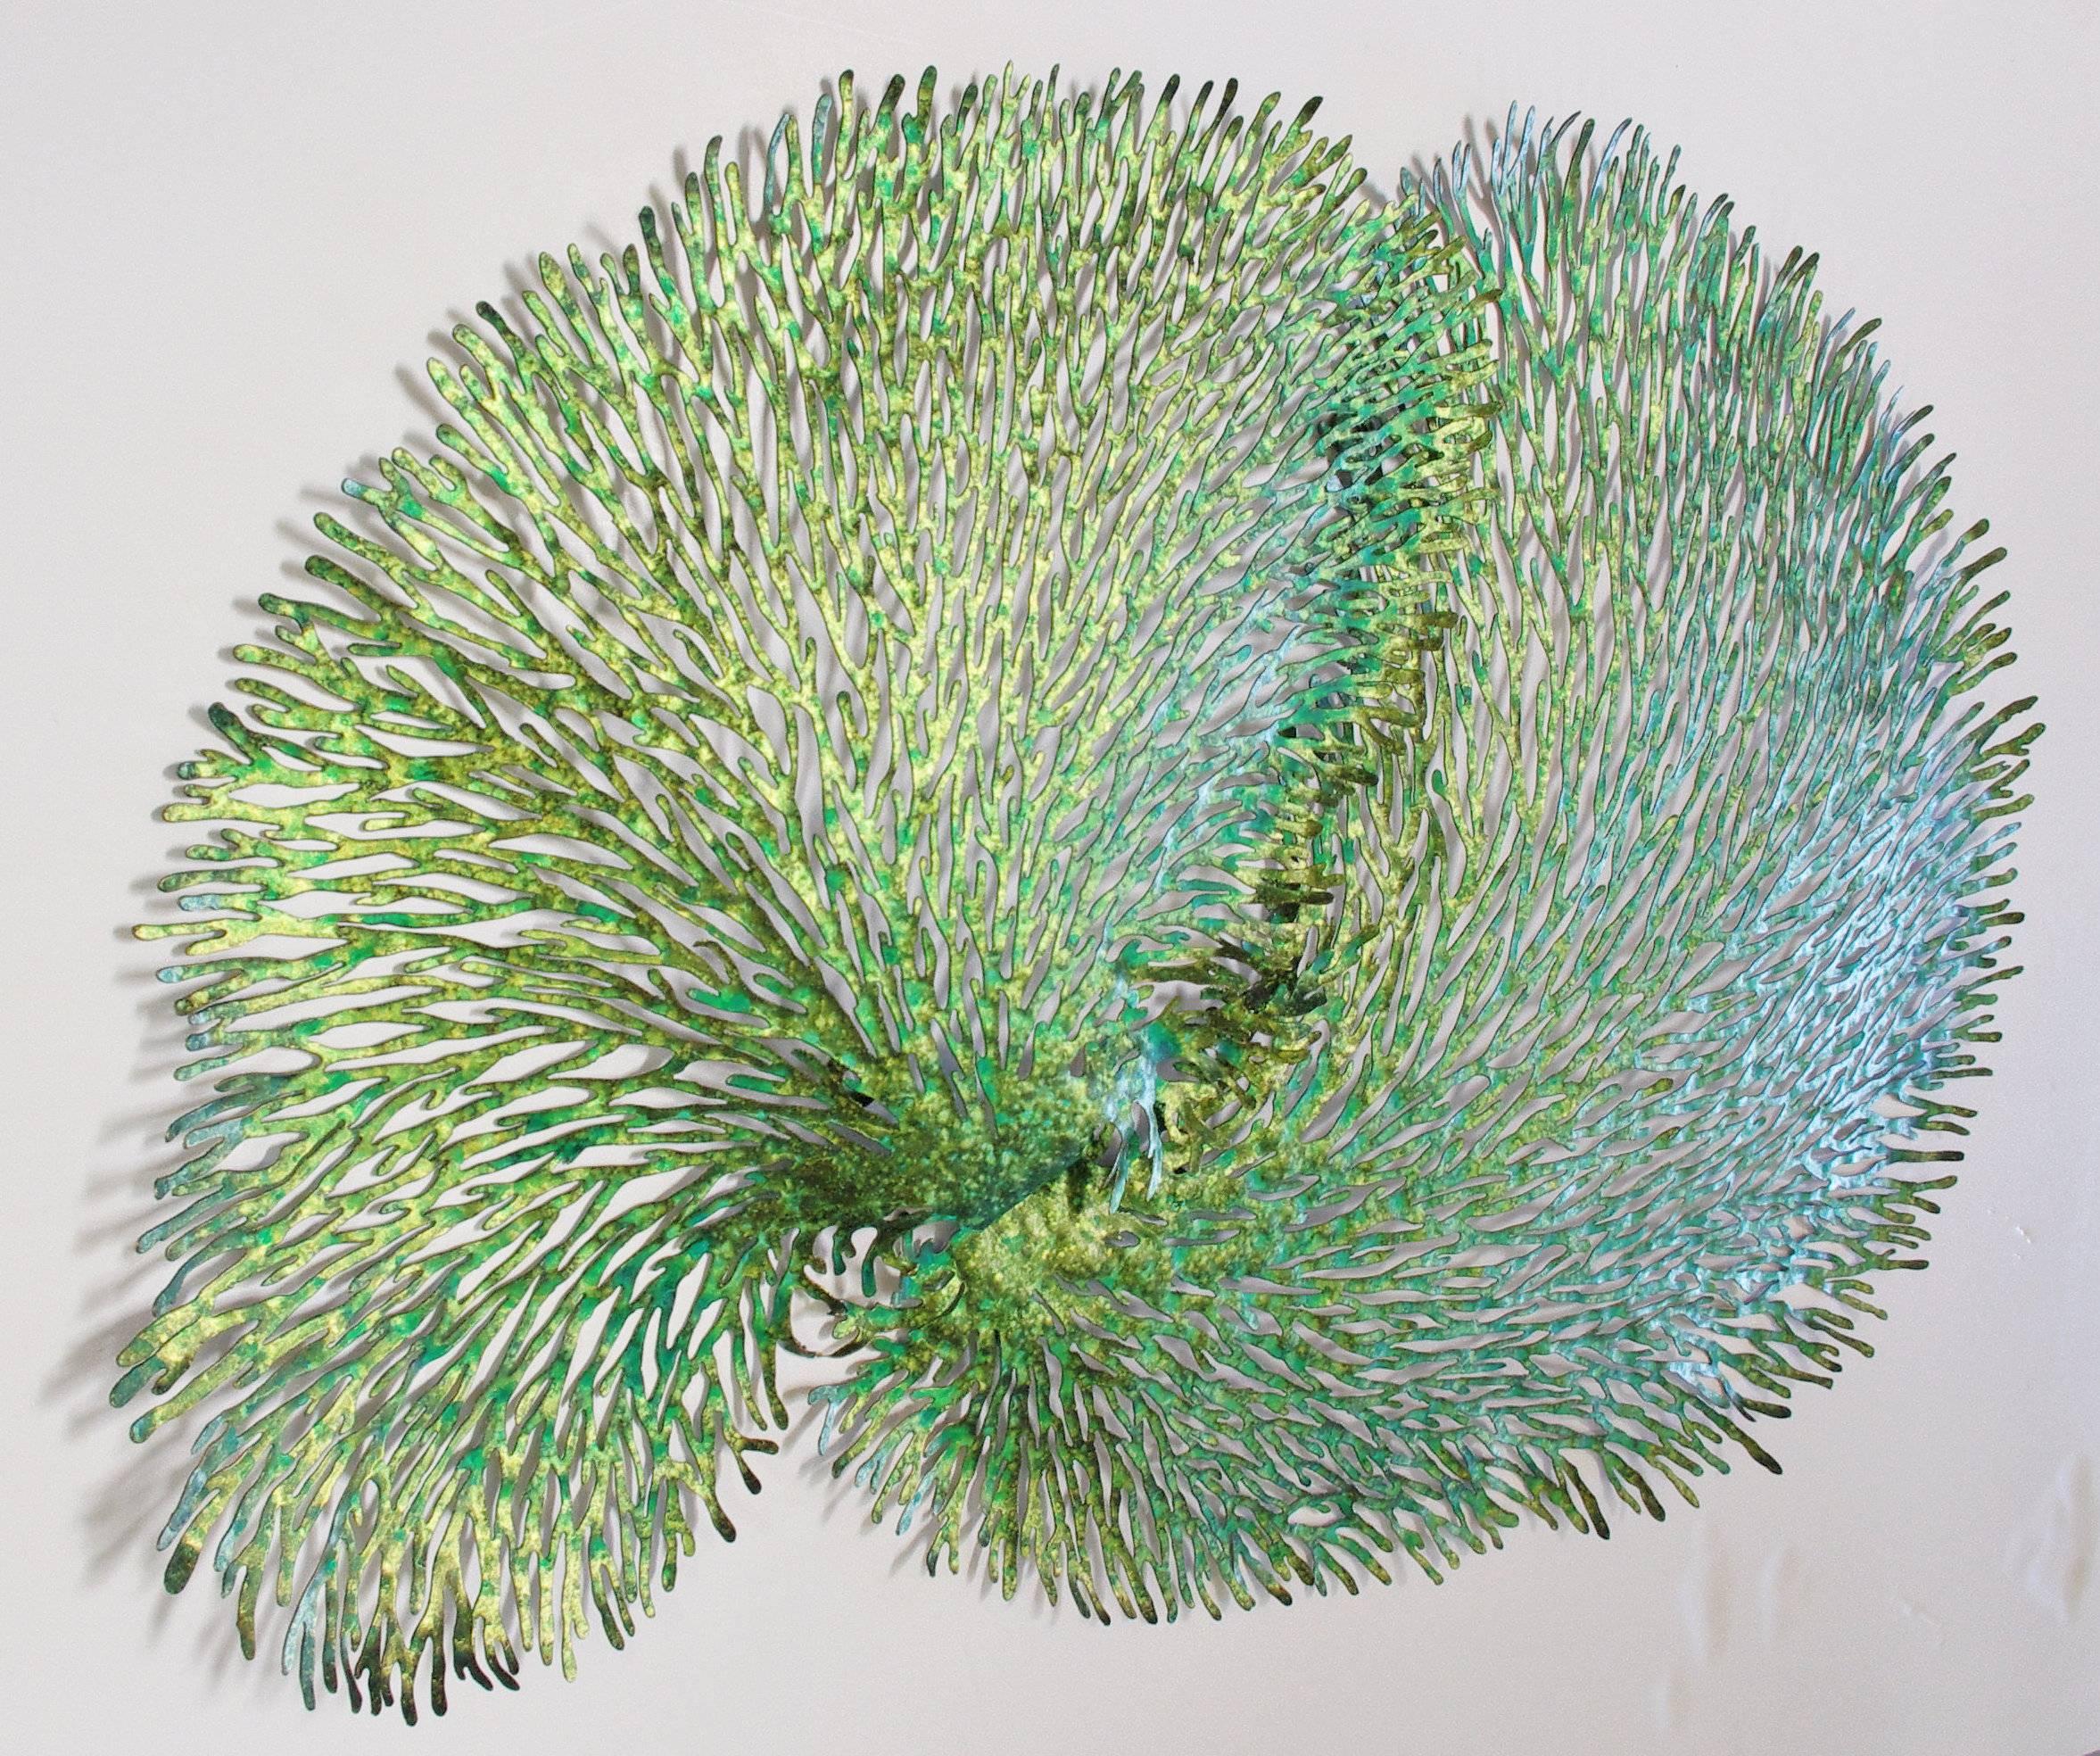 Green and gold iron coral wall sculpture designed by Fabio Bergomi for Fabio Ltd 
1 in stock in Palm Springs currently ON SALE for $1,349 !!
Depth: 4 inches / Width: 45 inches / Height: 30 inches
Order Reference : SC1
This piece makes for great and